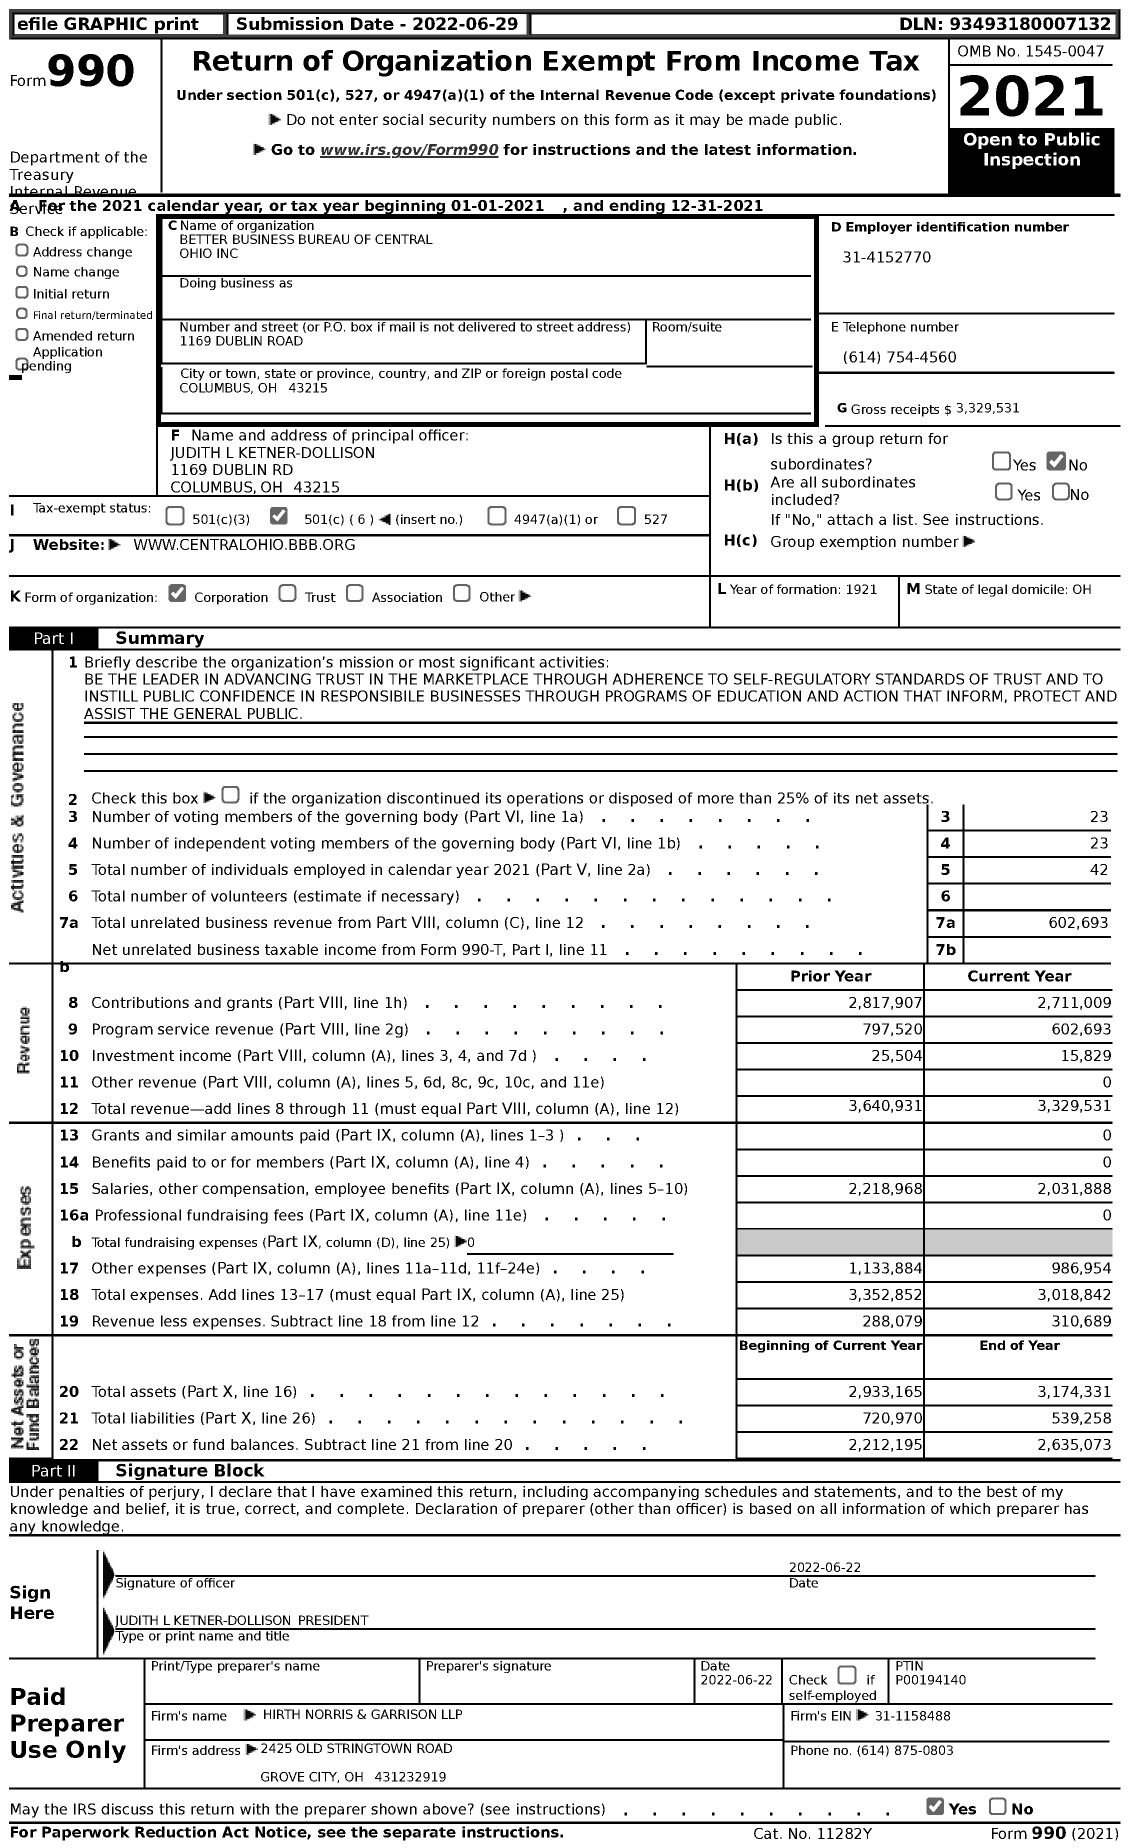 Image of first page of 2021 Form 990 for Better Business Bureau of Central Ohio (BBB)